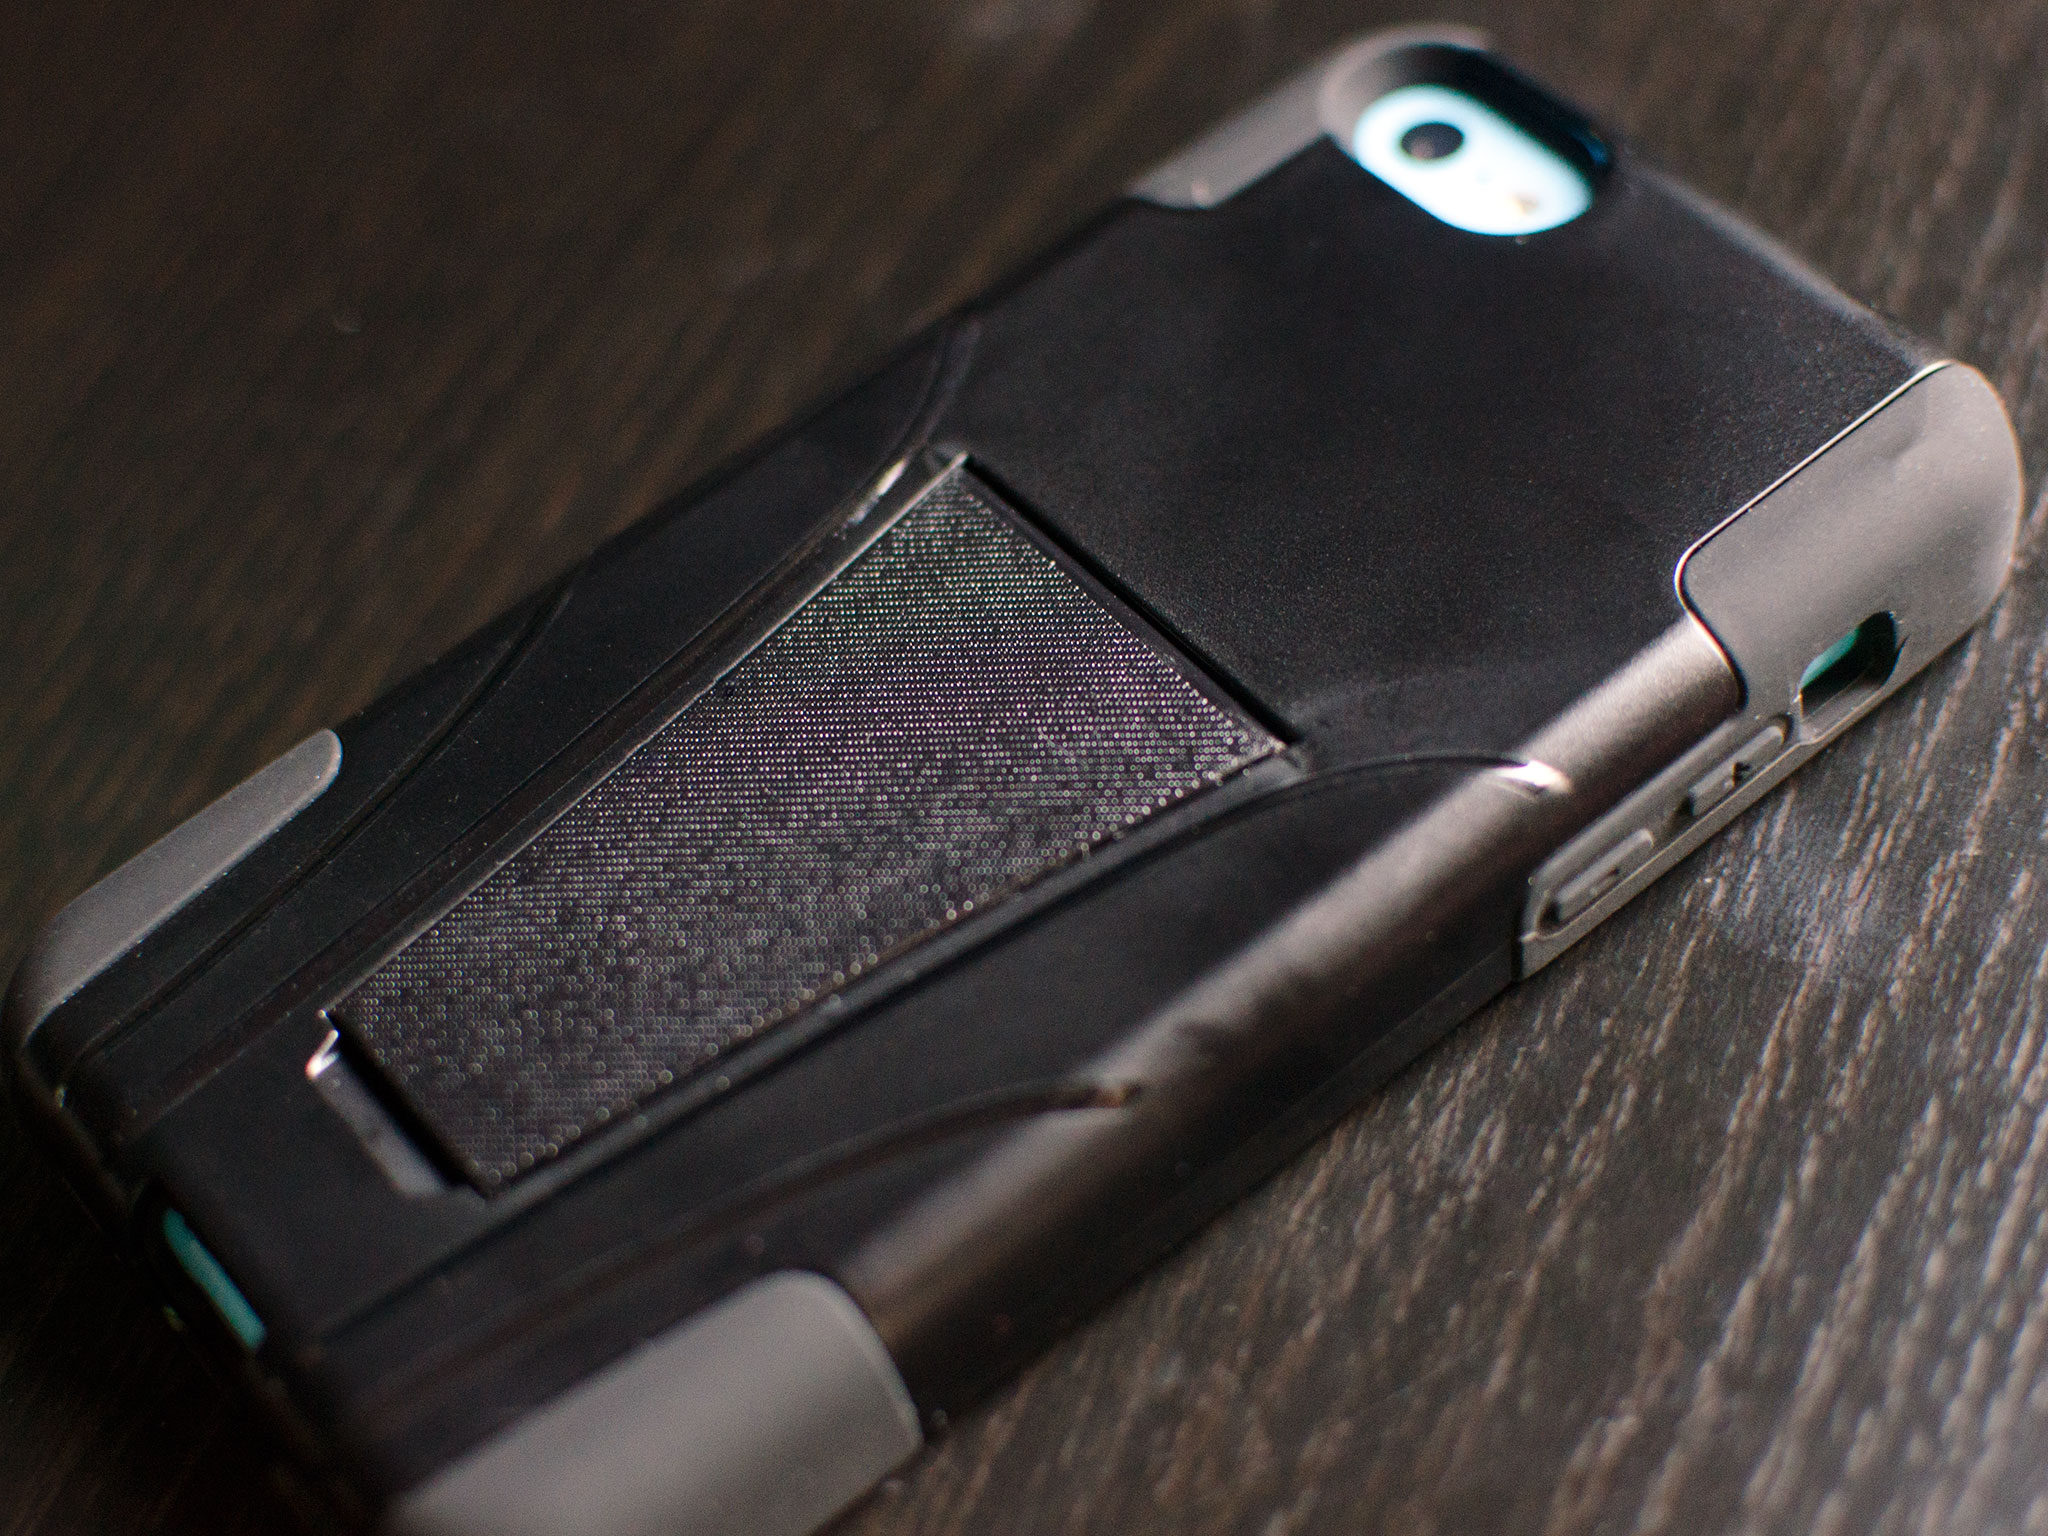 Amzer Double Layer Hybrid Case with Kickstand for iPhone 5c review